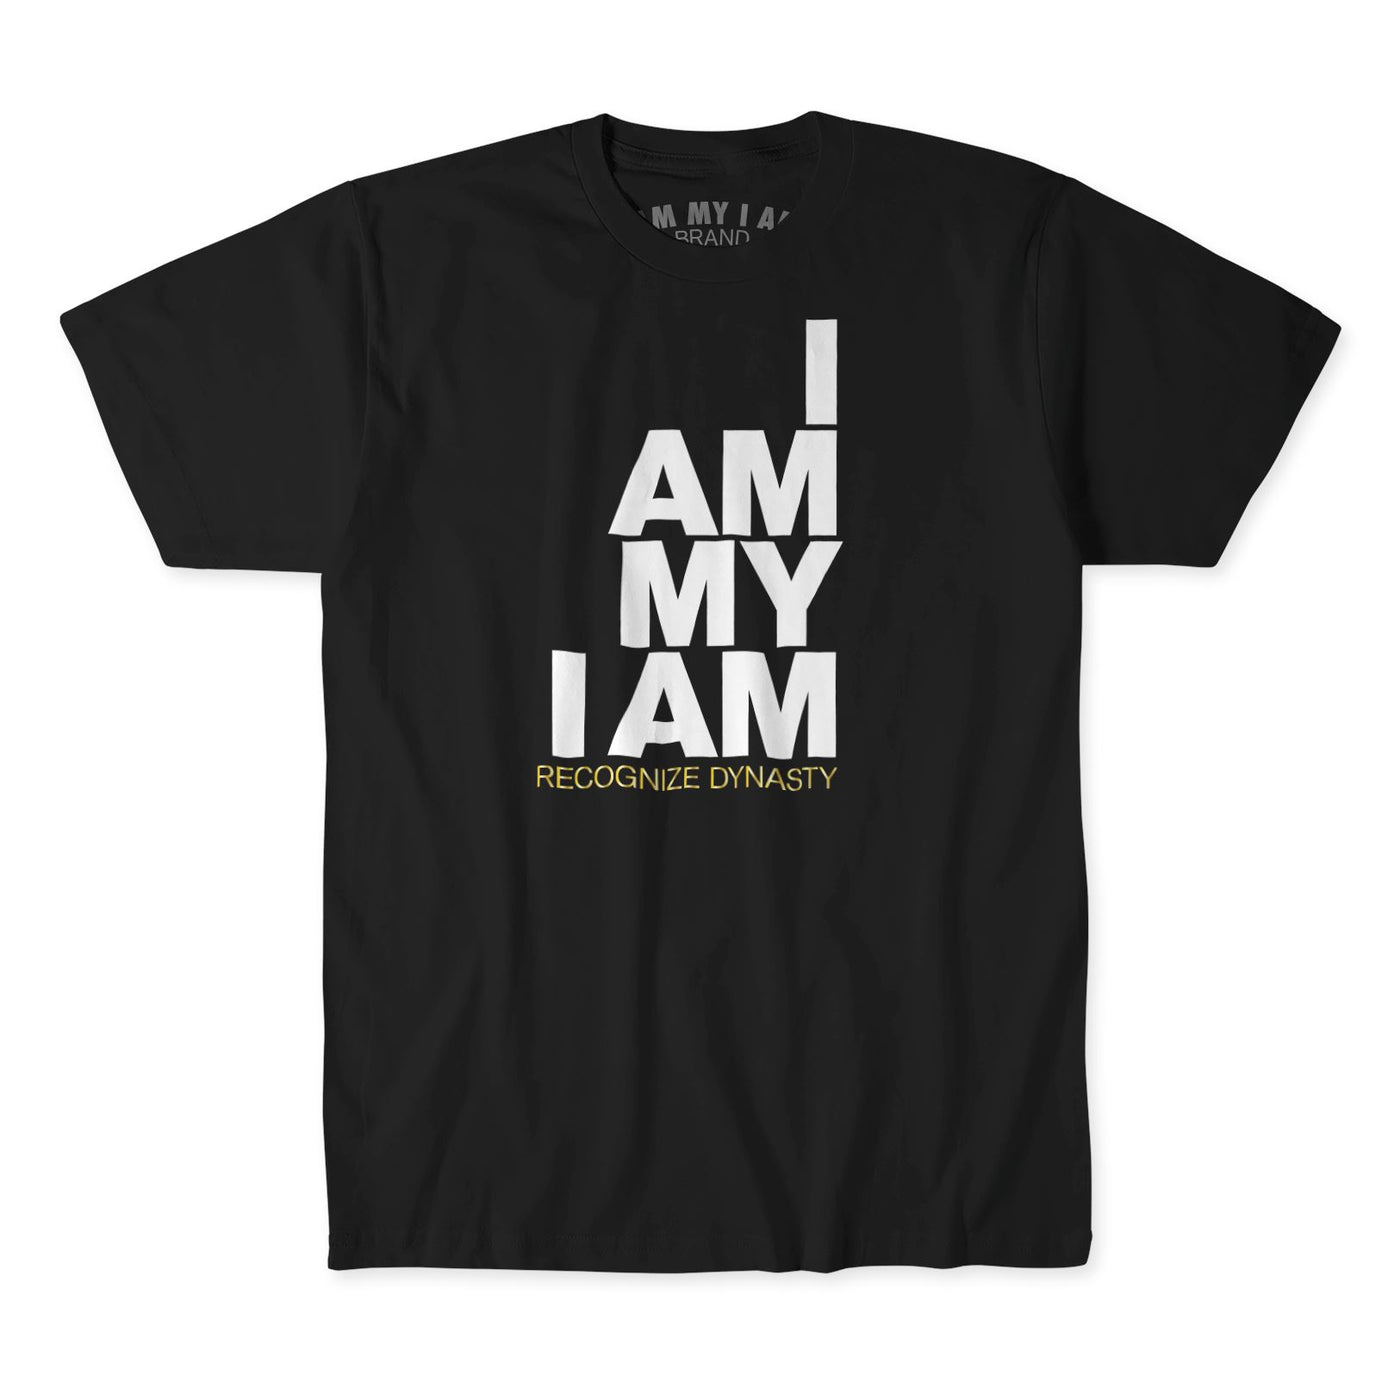 I AM MY I AM. Collection Hyperfly Tee White X Small